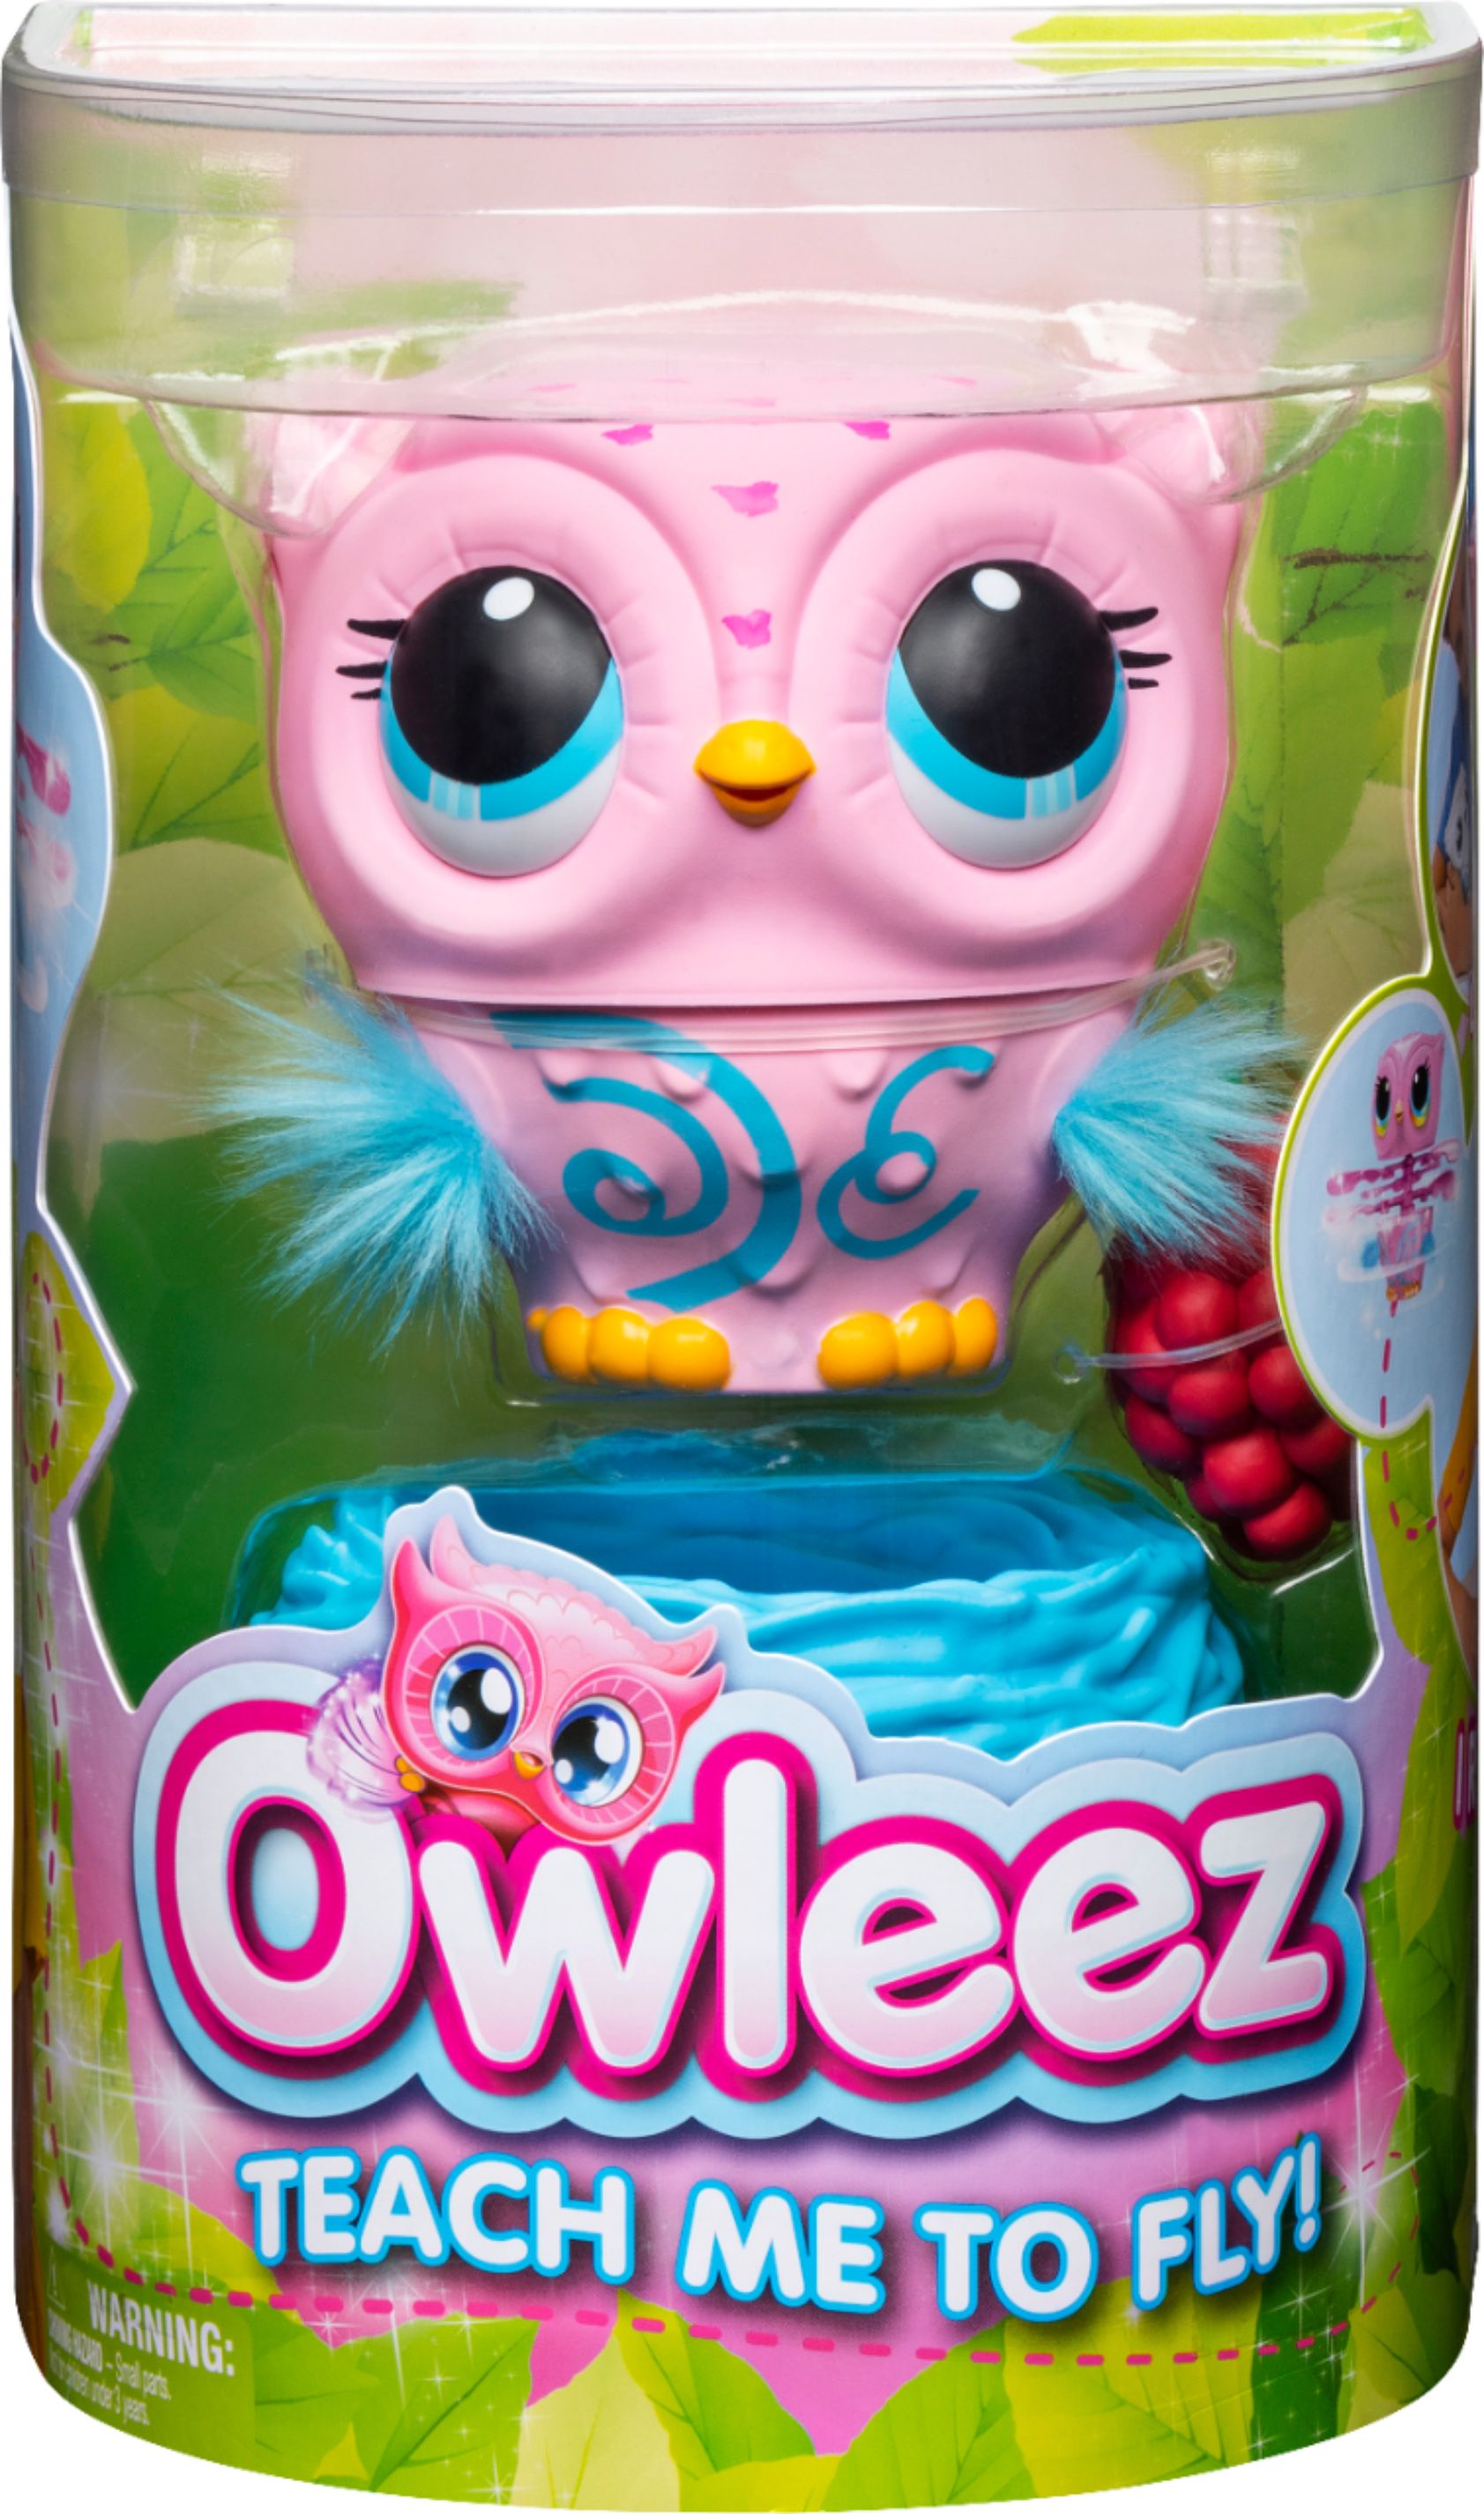 OWLEEZ Flying Baby Owl Pink Interactive Pet Toy Drone Helicopter Lights & Sound 